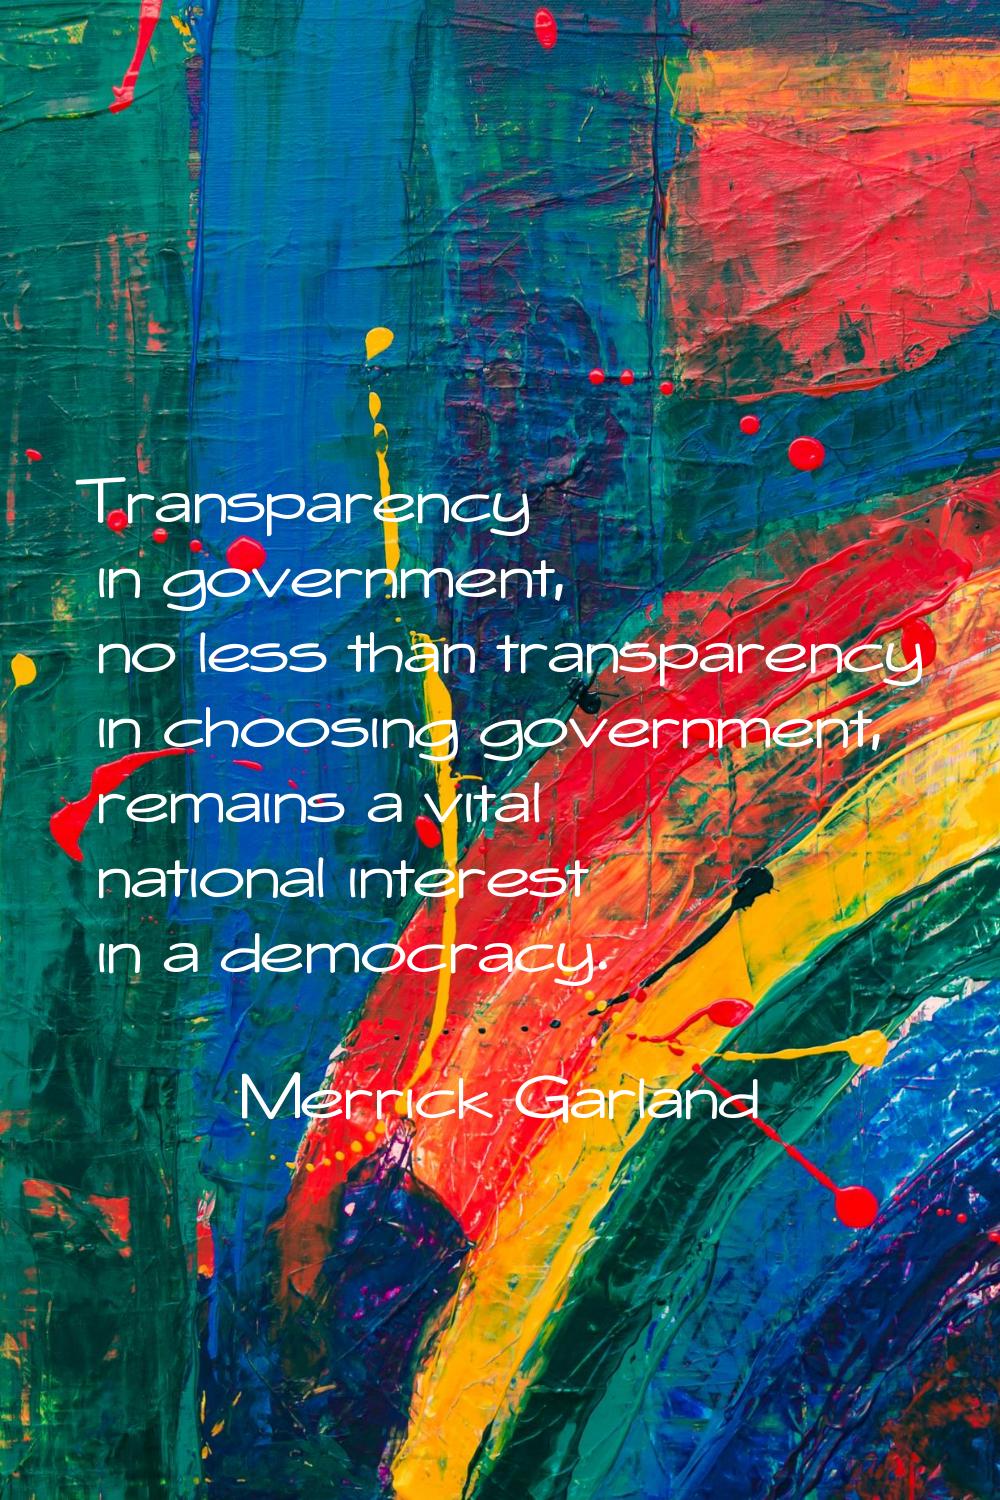 Transparency in government, no less than transparency in choosing government, remains a vital natio